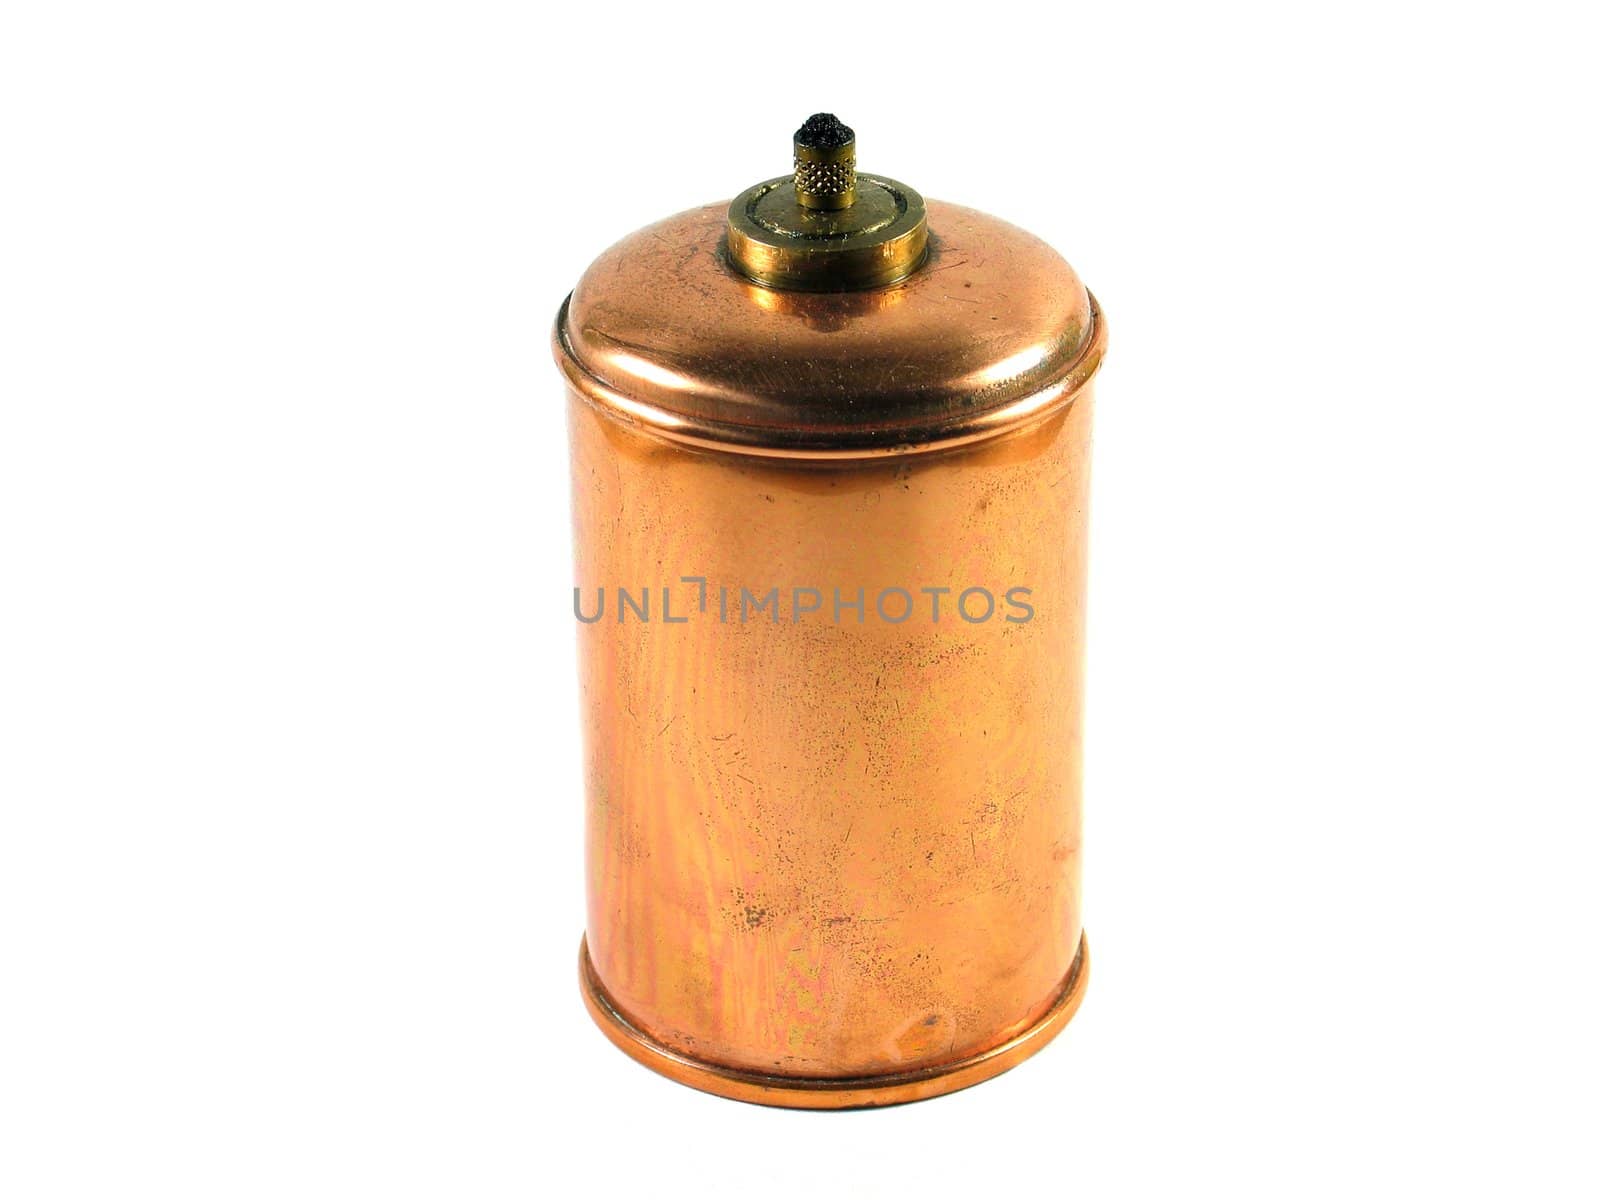 Antique copper oil lamp isolated on white